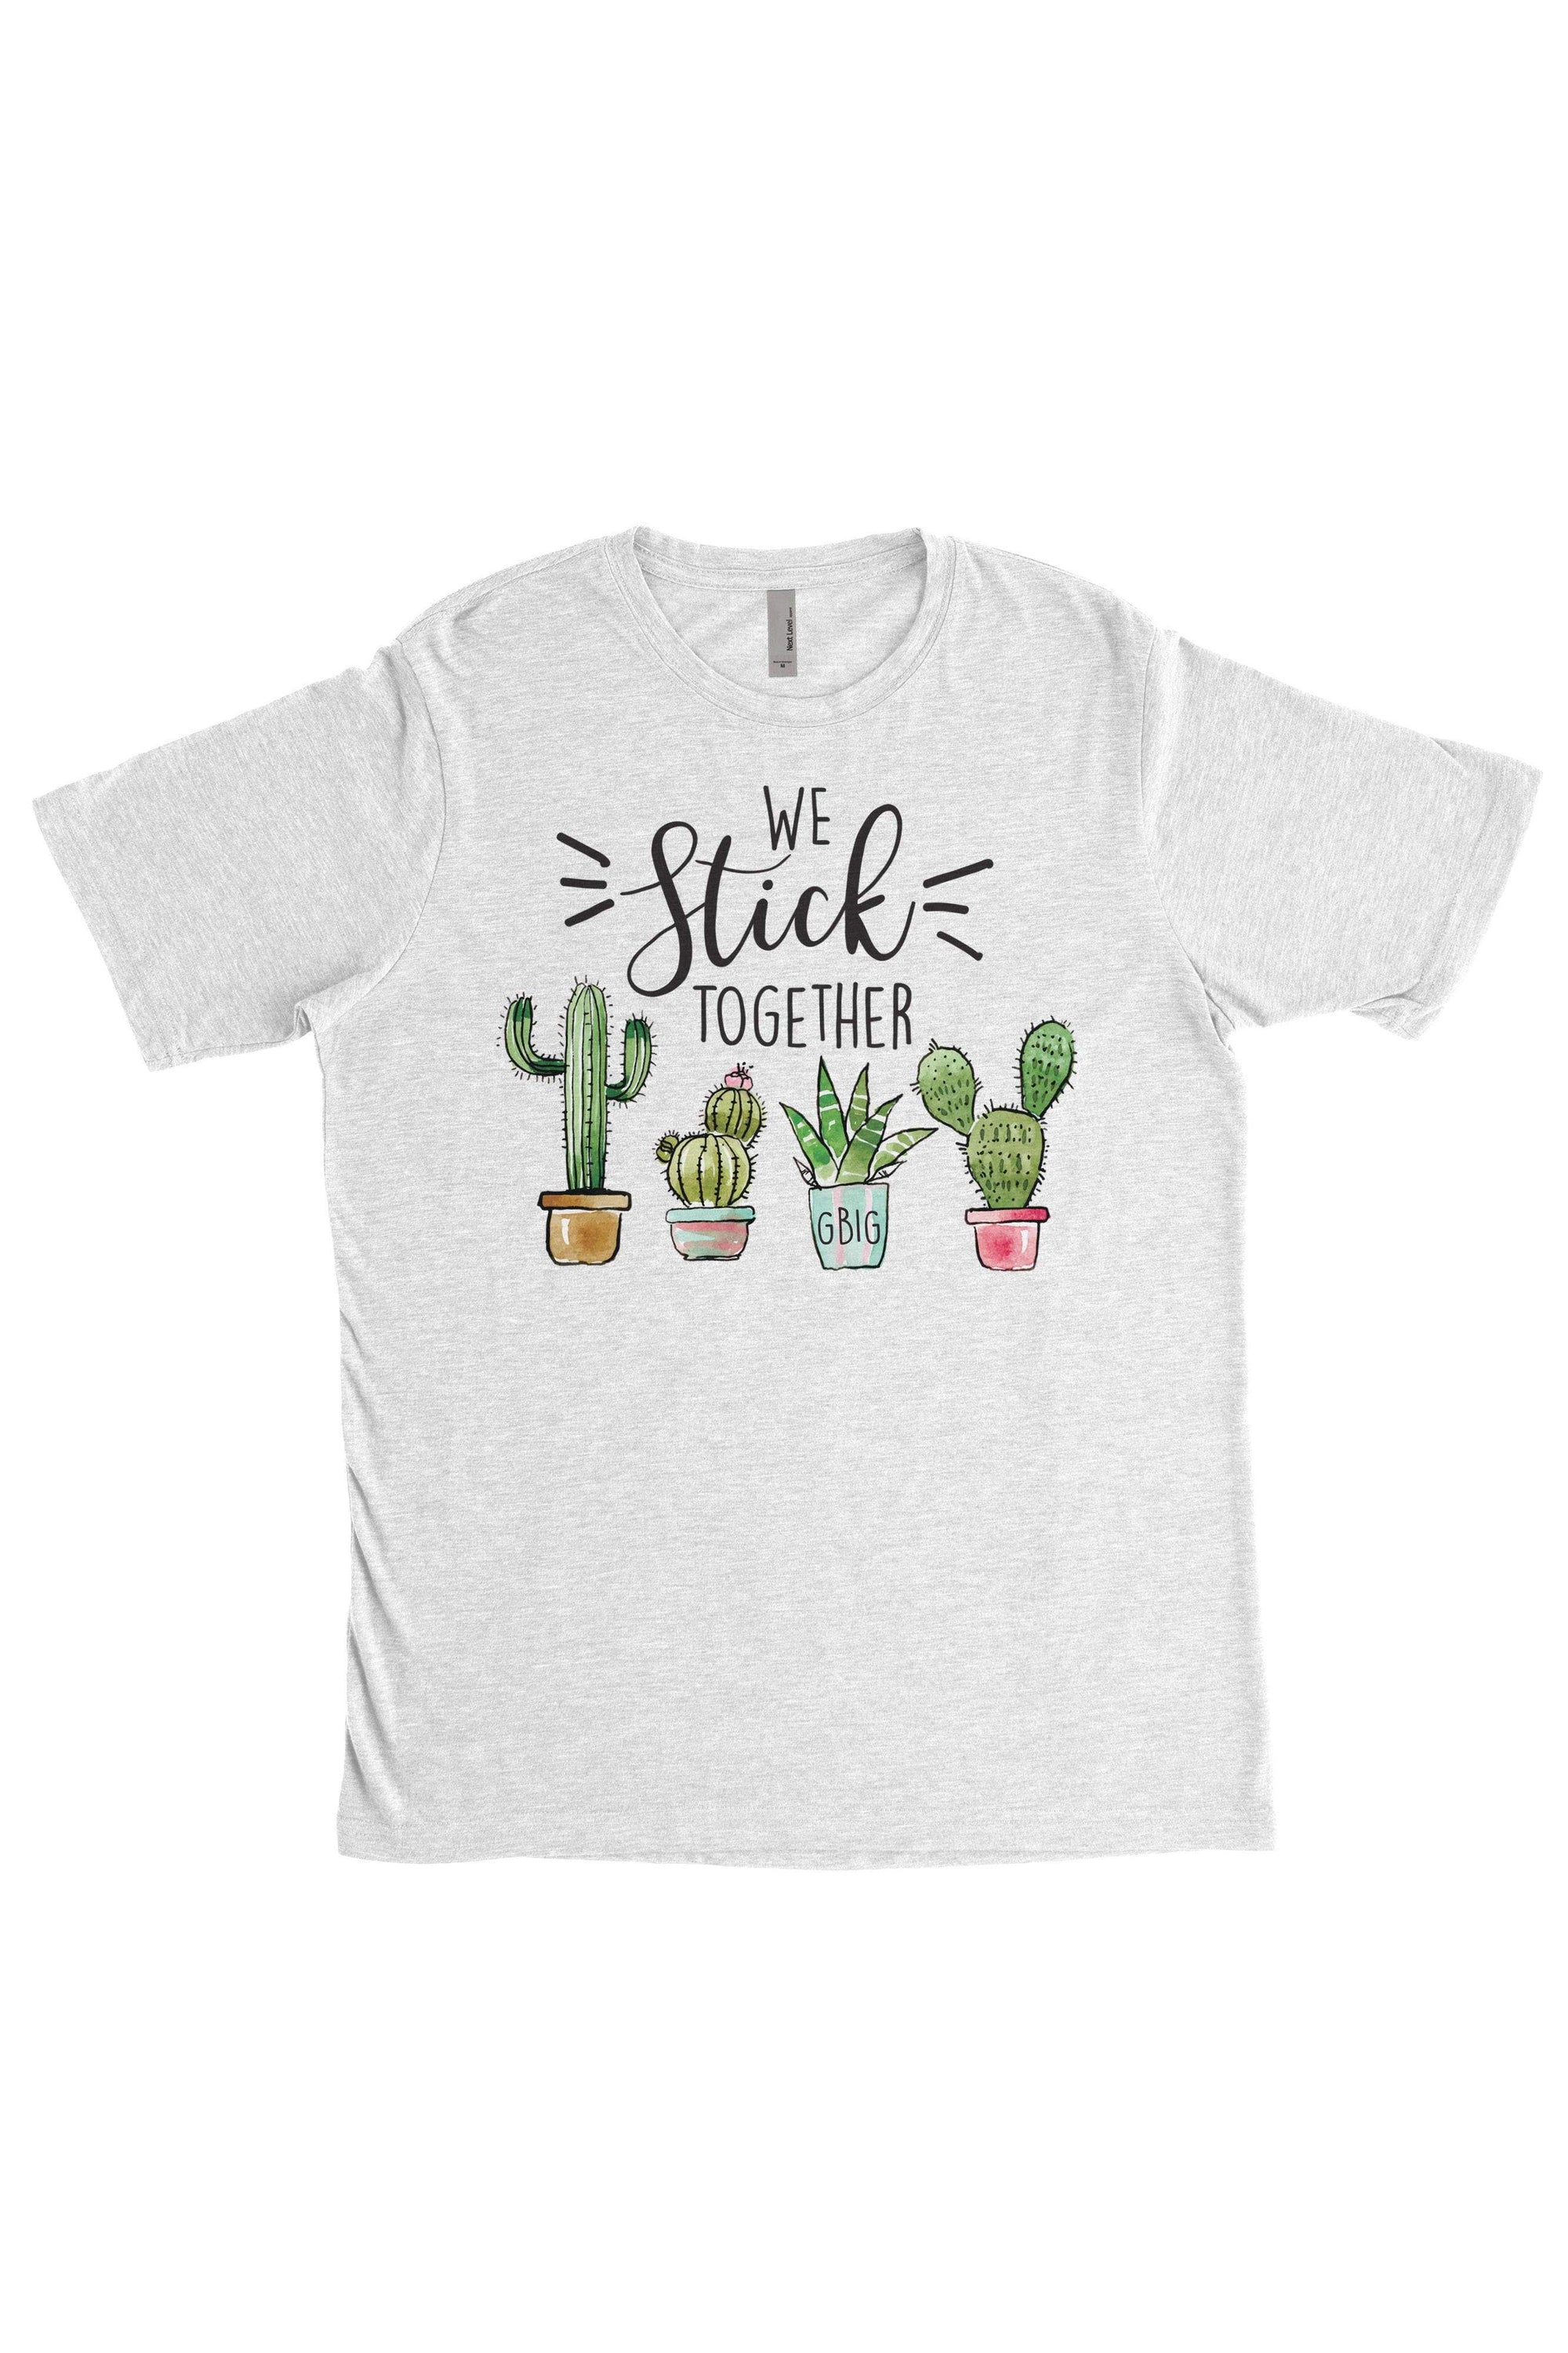 Big Little We Stick Together Shirt - Next Level Unisex Short Sleeve, Ladies, Sunny and Southern, - Sunny and Southern,